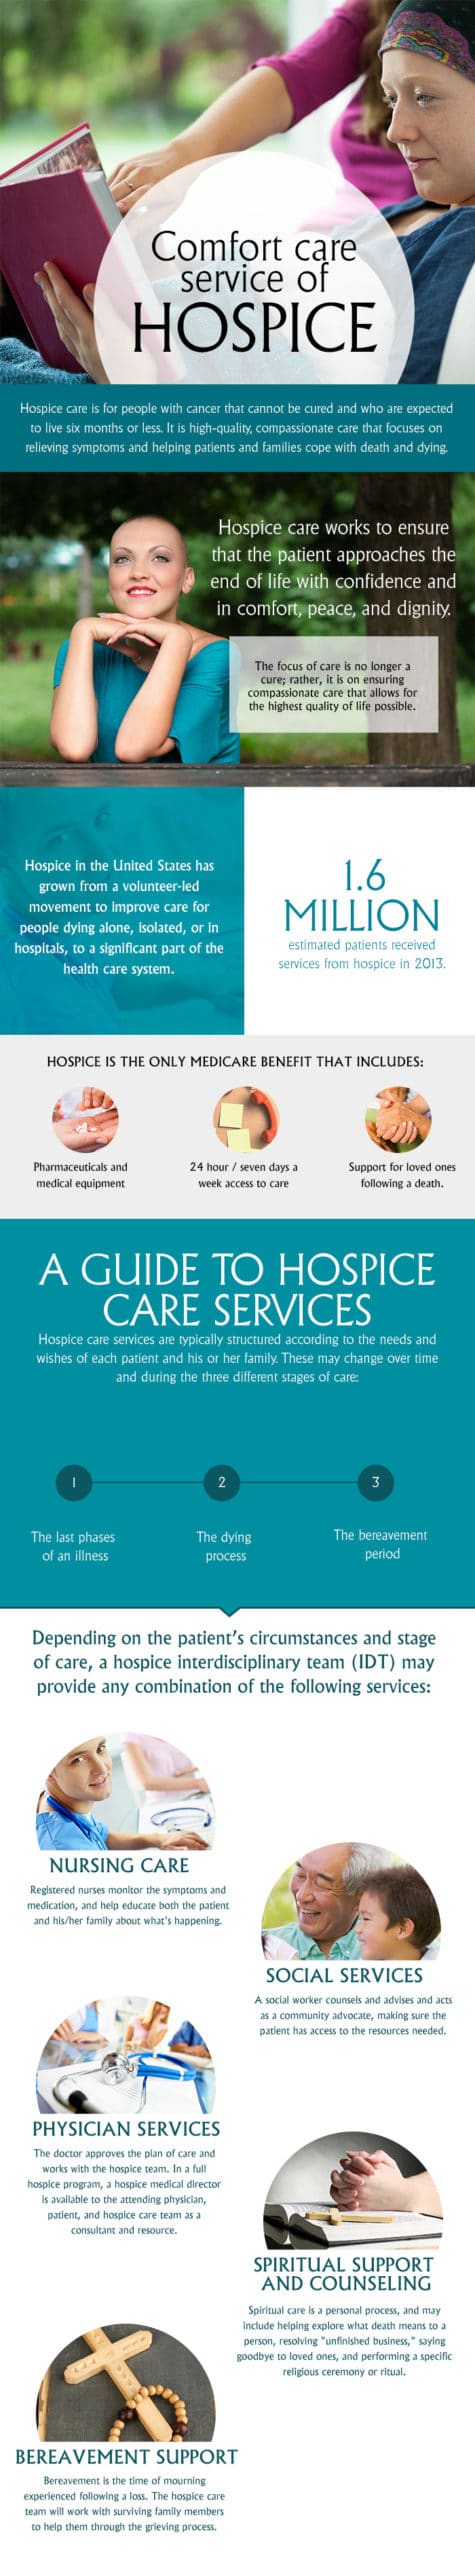 hospice care scaled